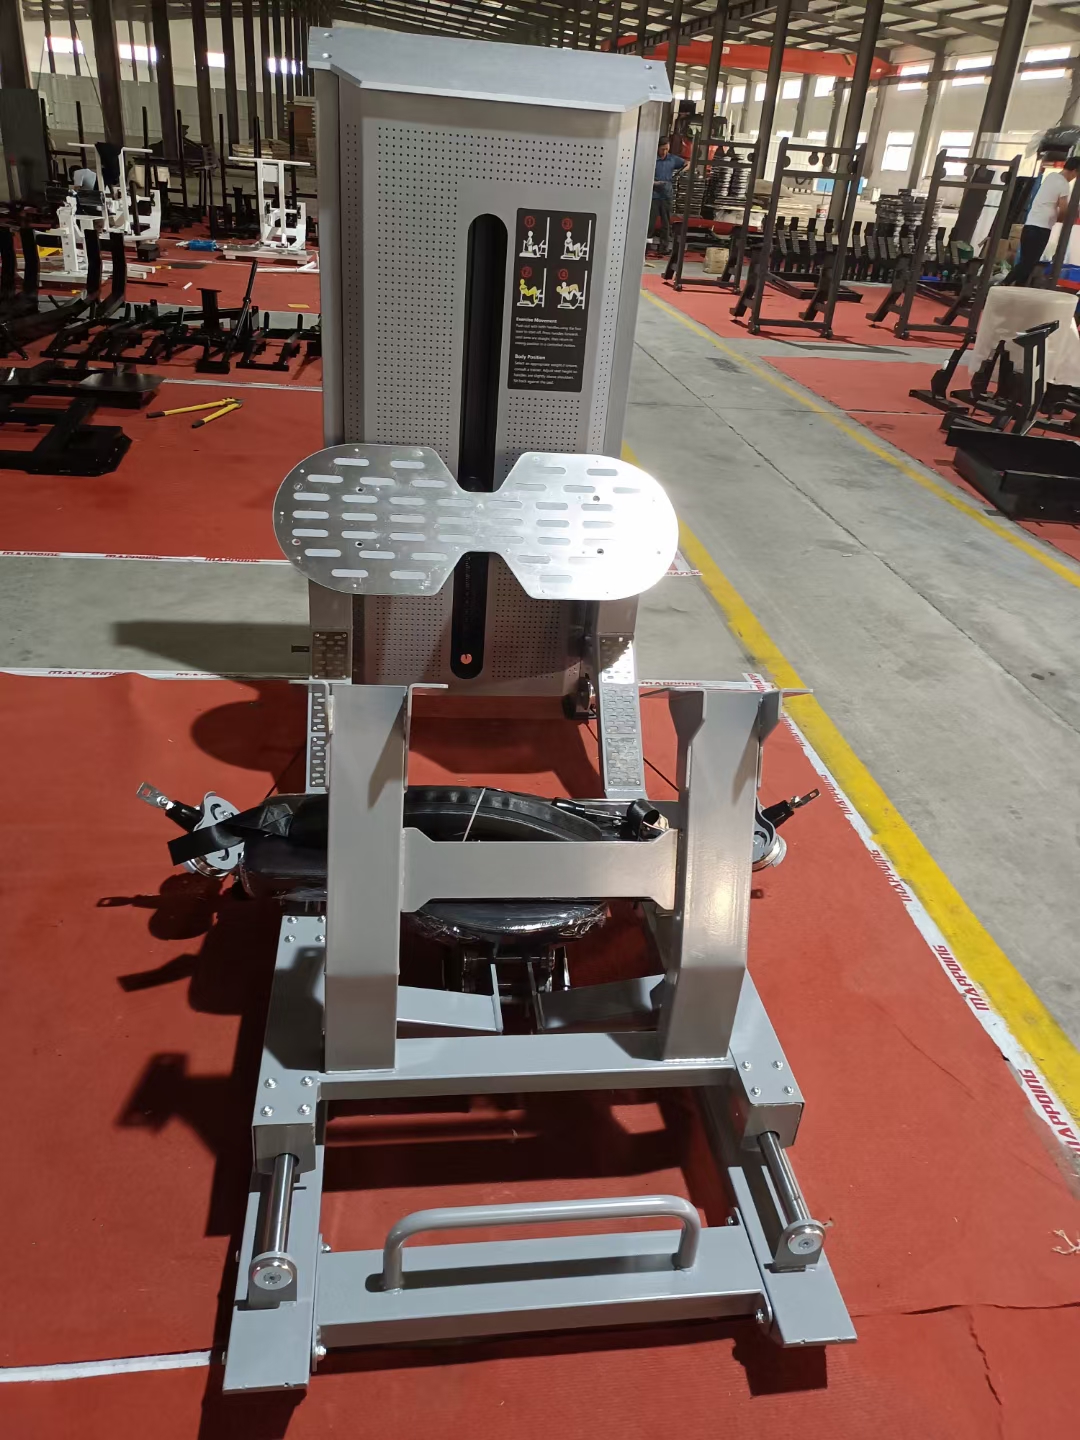 CM-548 Commercial Fitness Thrust Machine Booty Builder Machine Glute Drive